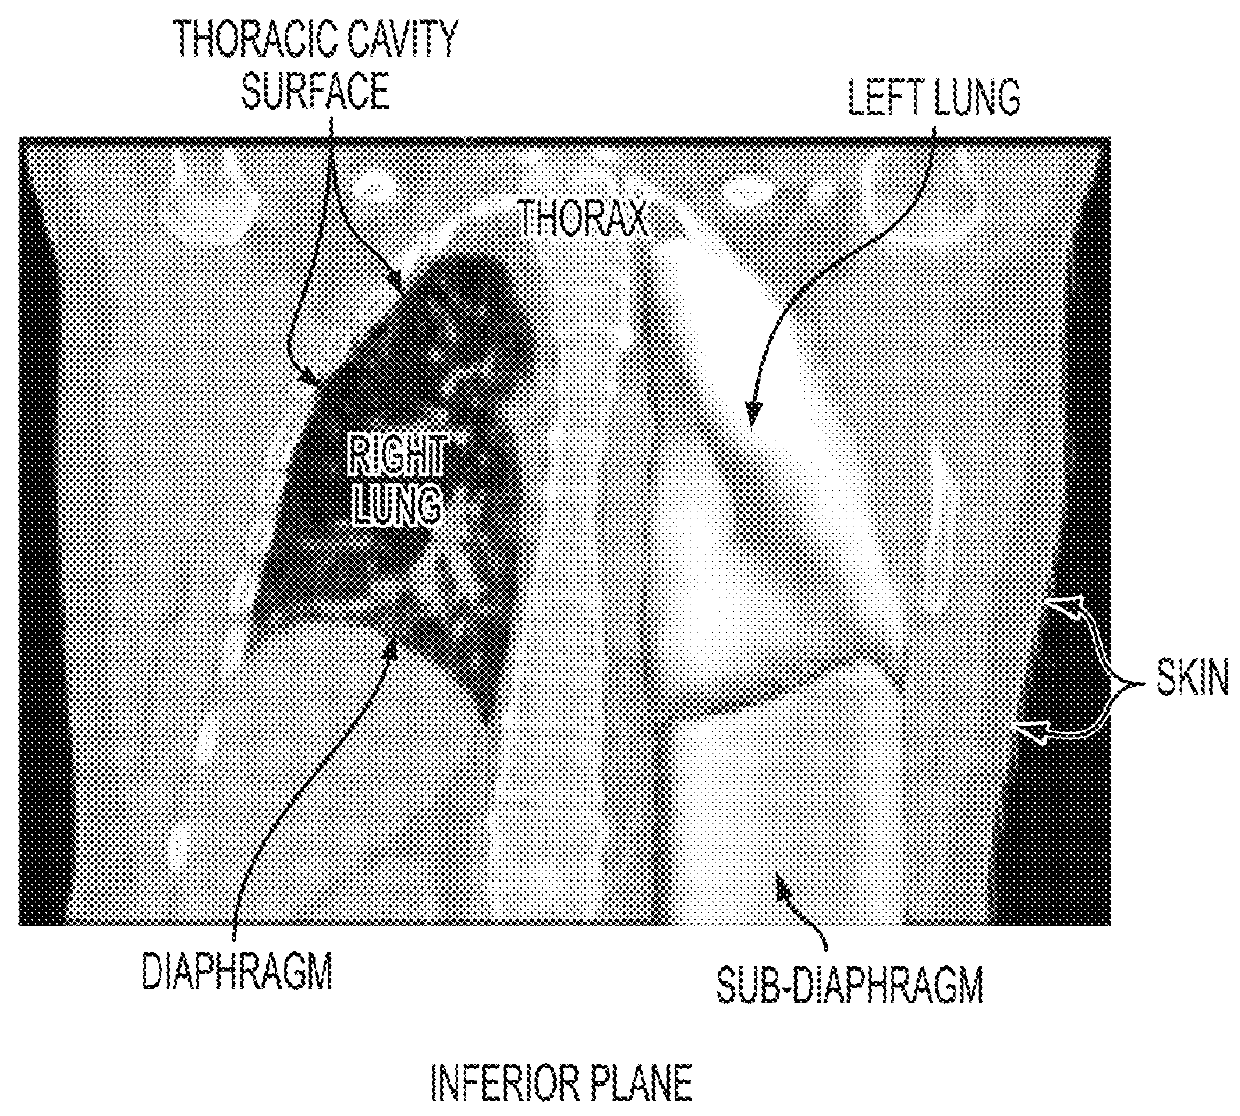 System and method for prediction of respiratory motion from 3D thoracic images